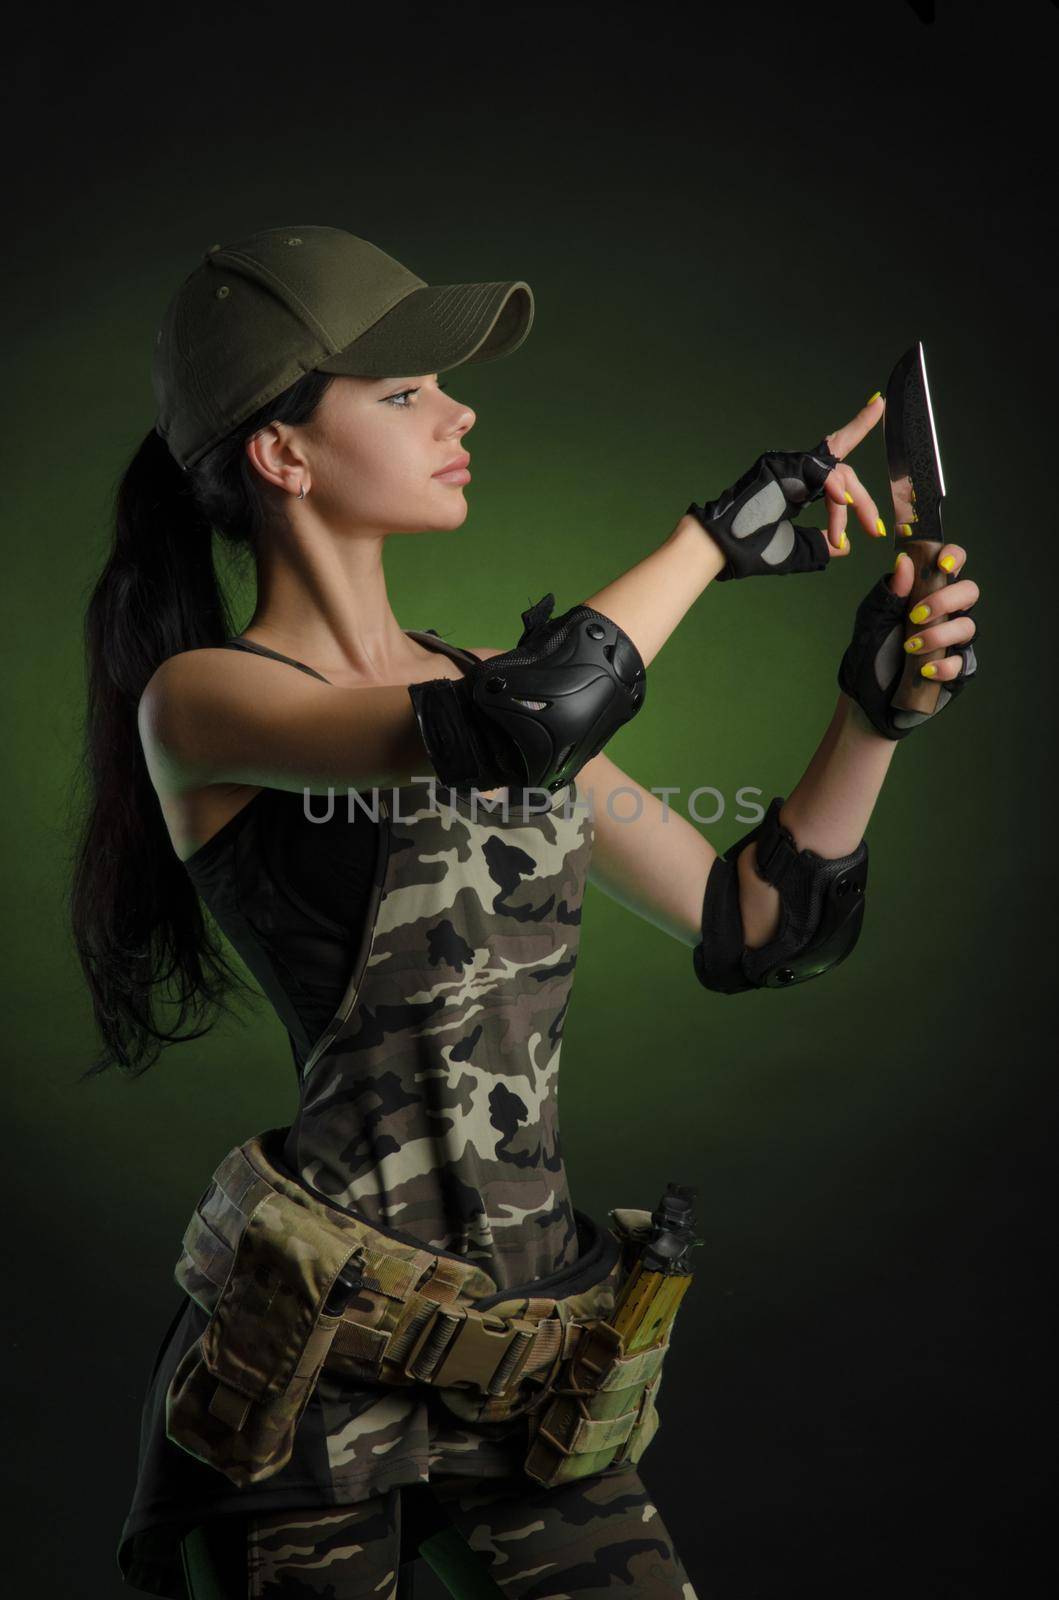 girl in military overalls airsoft posing with a gun in his hands on a dark background in the haze